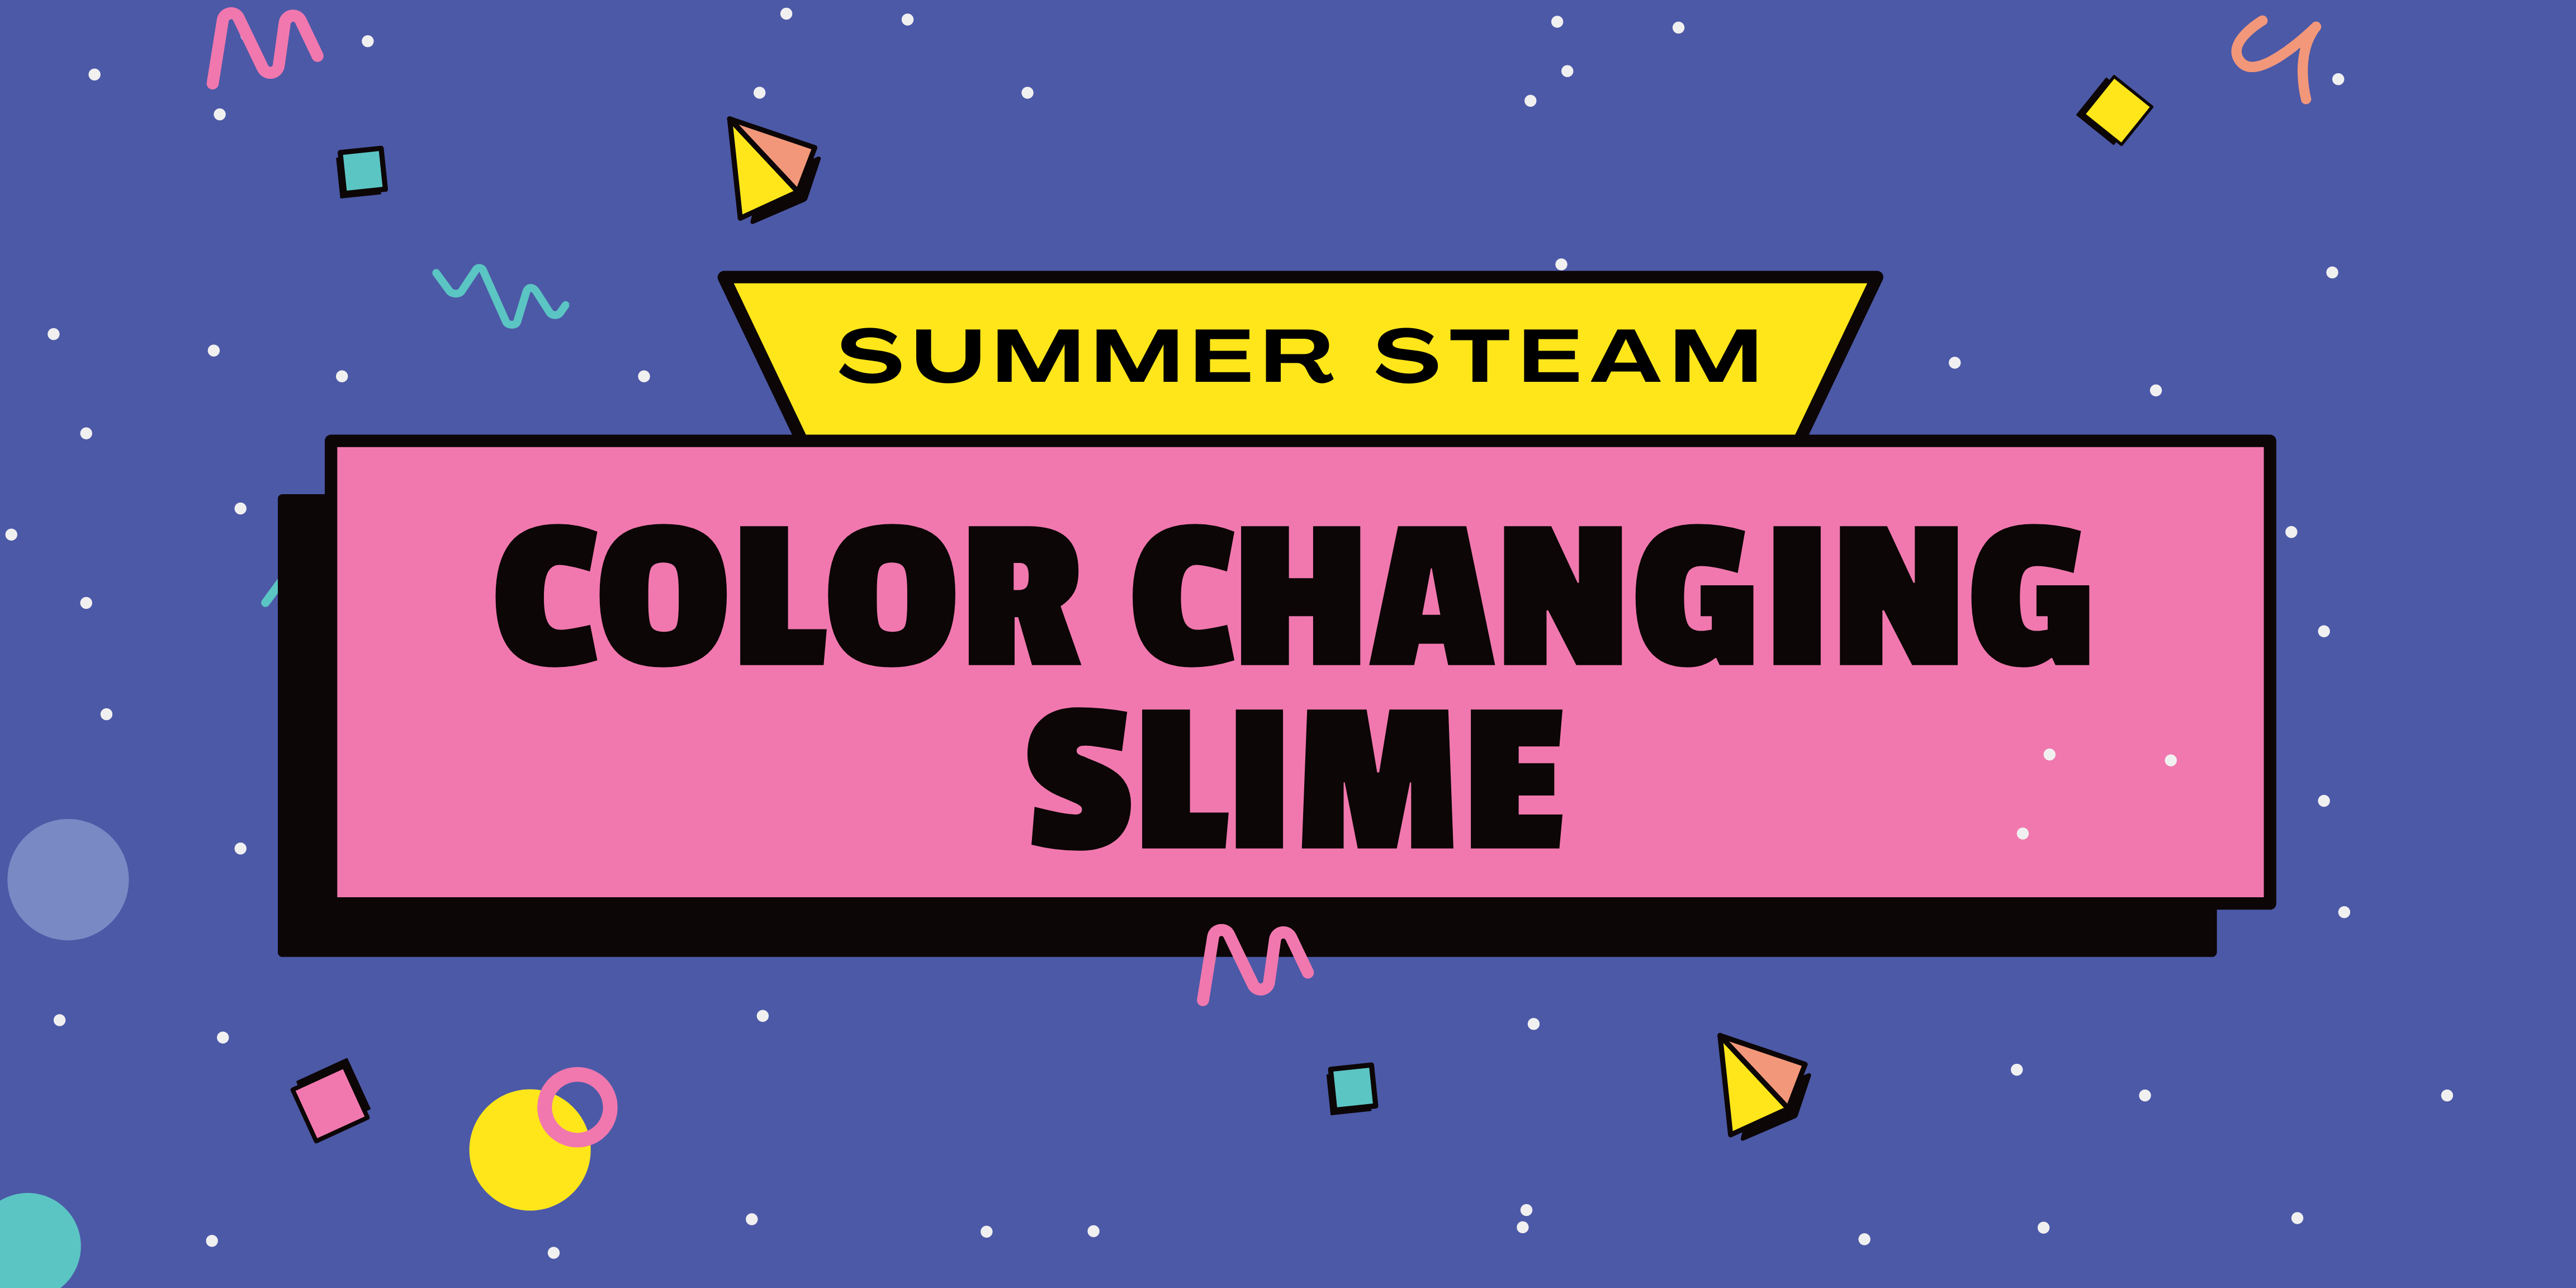 Summer STEAM: Color Changing Slime at Dorchester Road Library